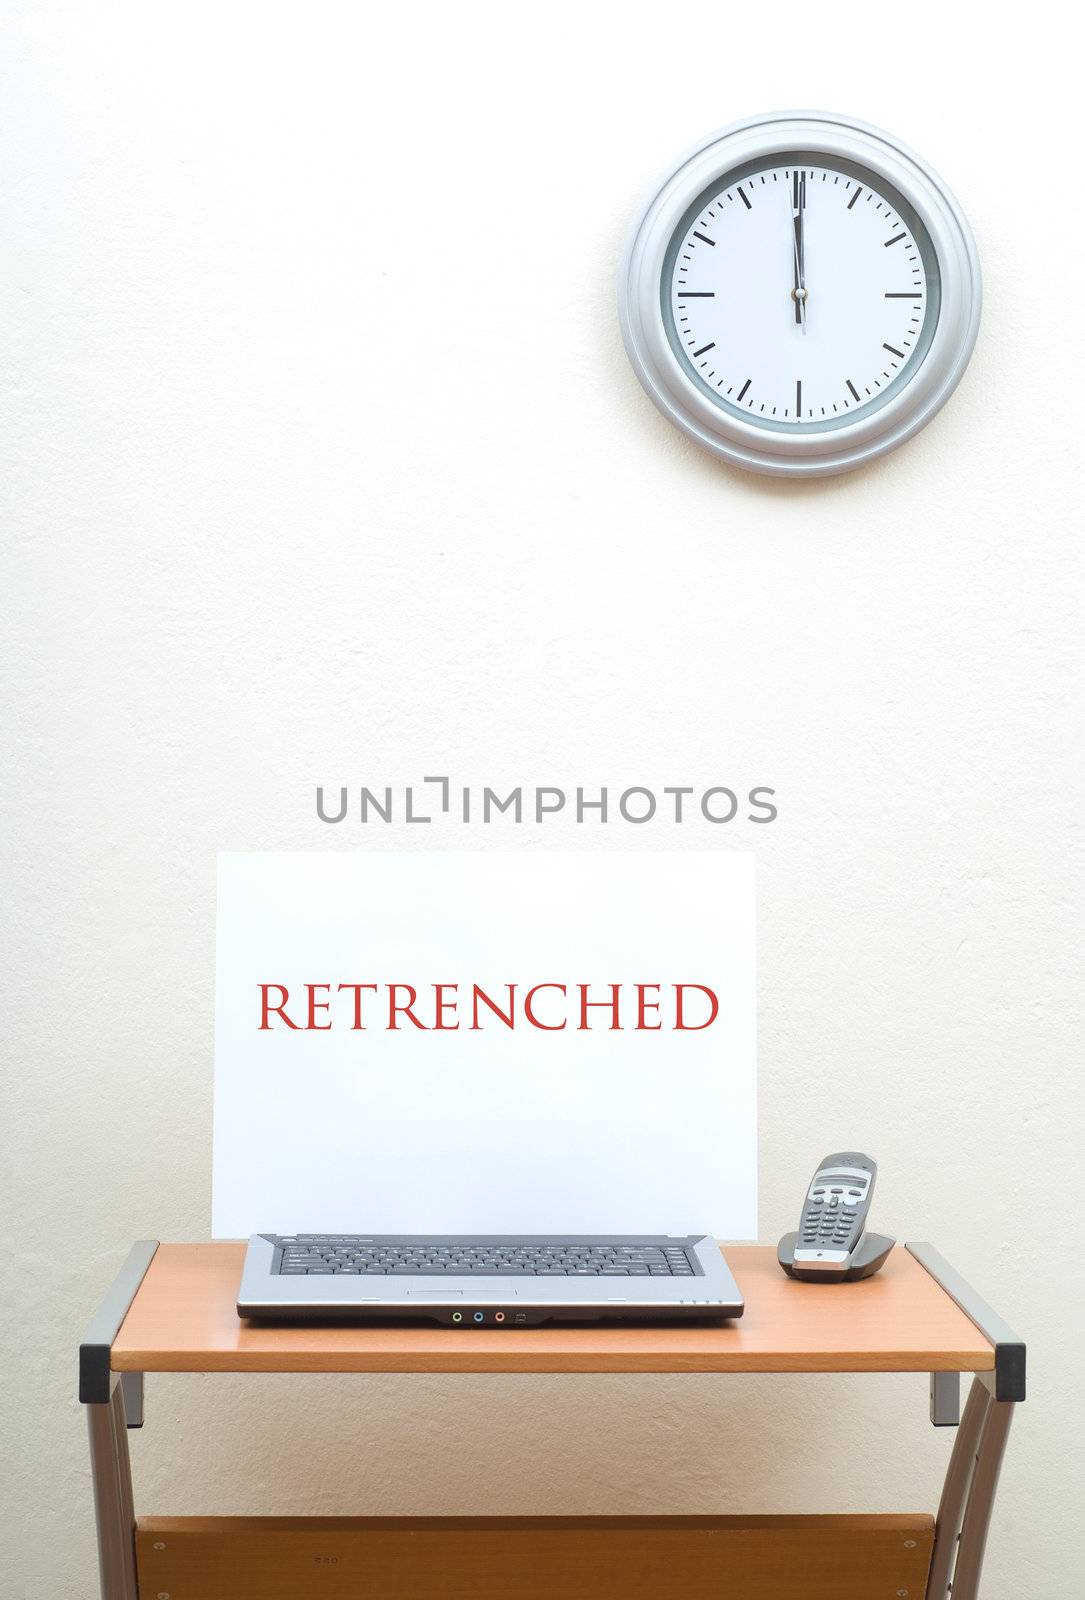 Office desk with retrenched sign on open laptop nest to phone, clock on wall